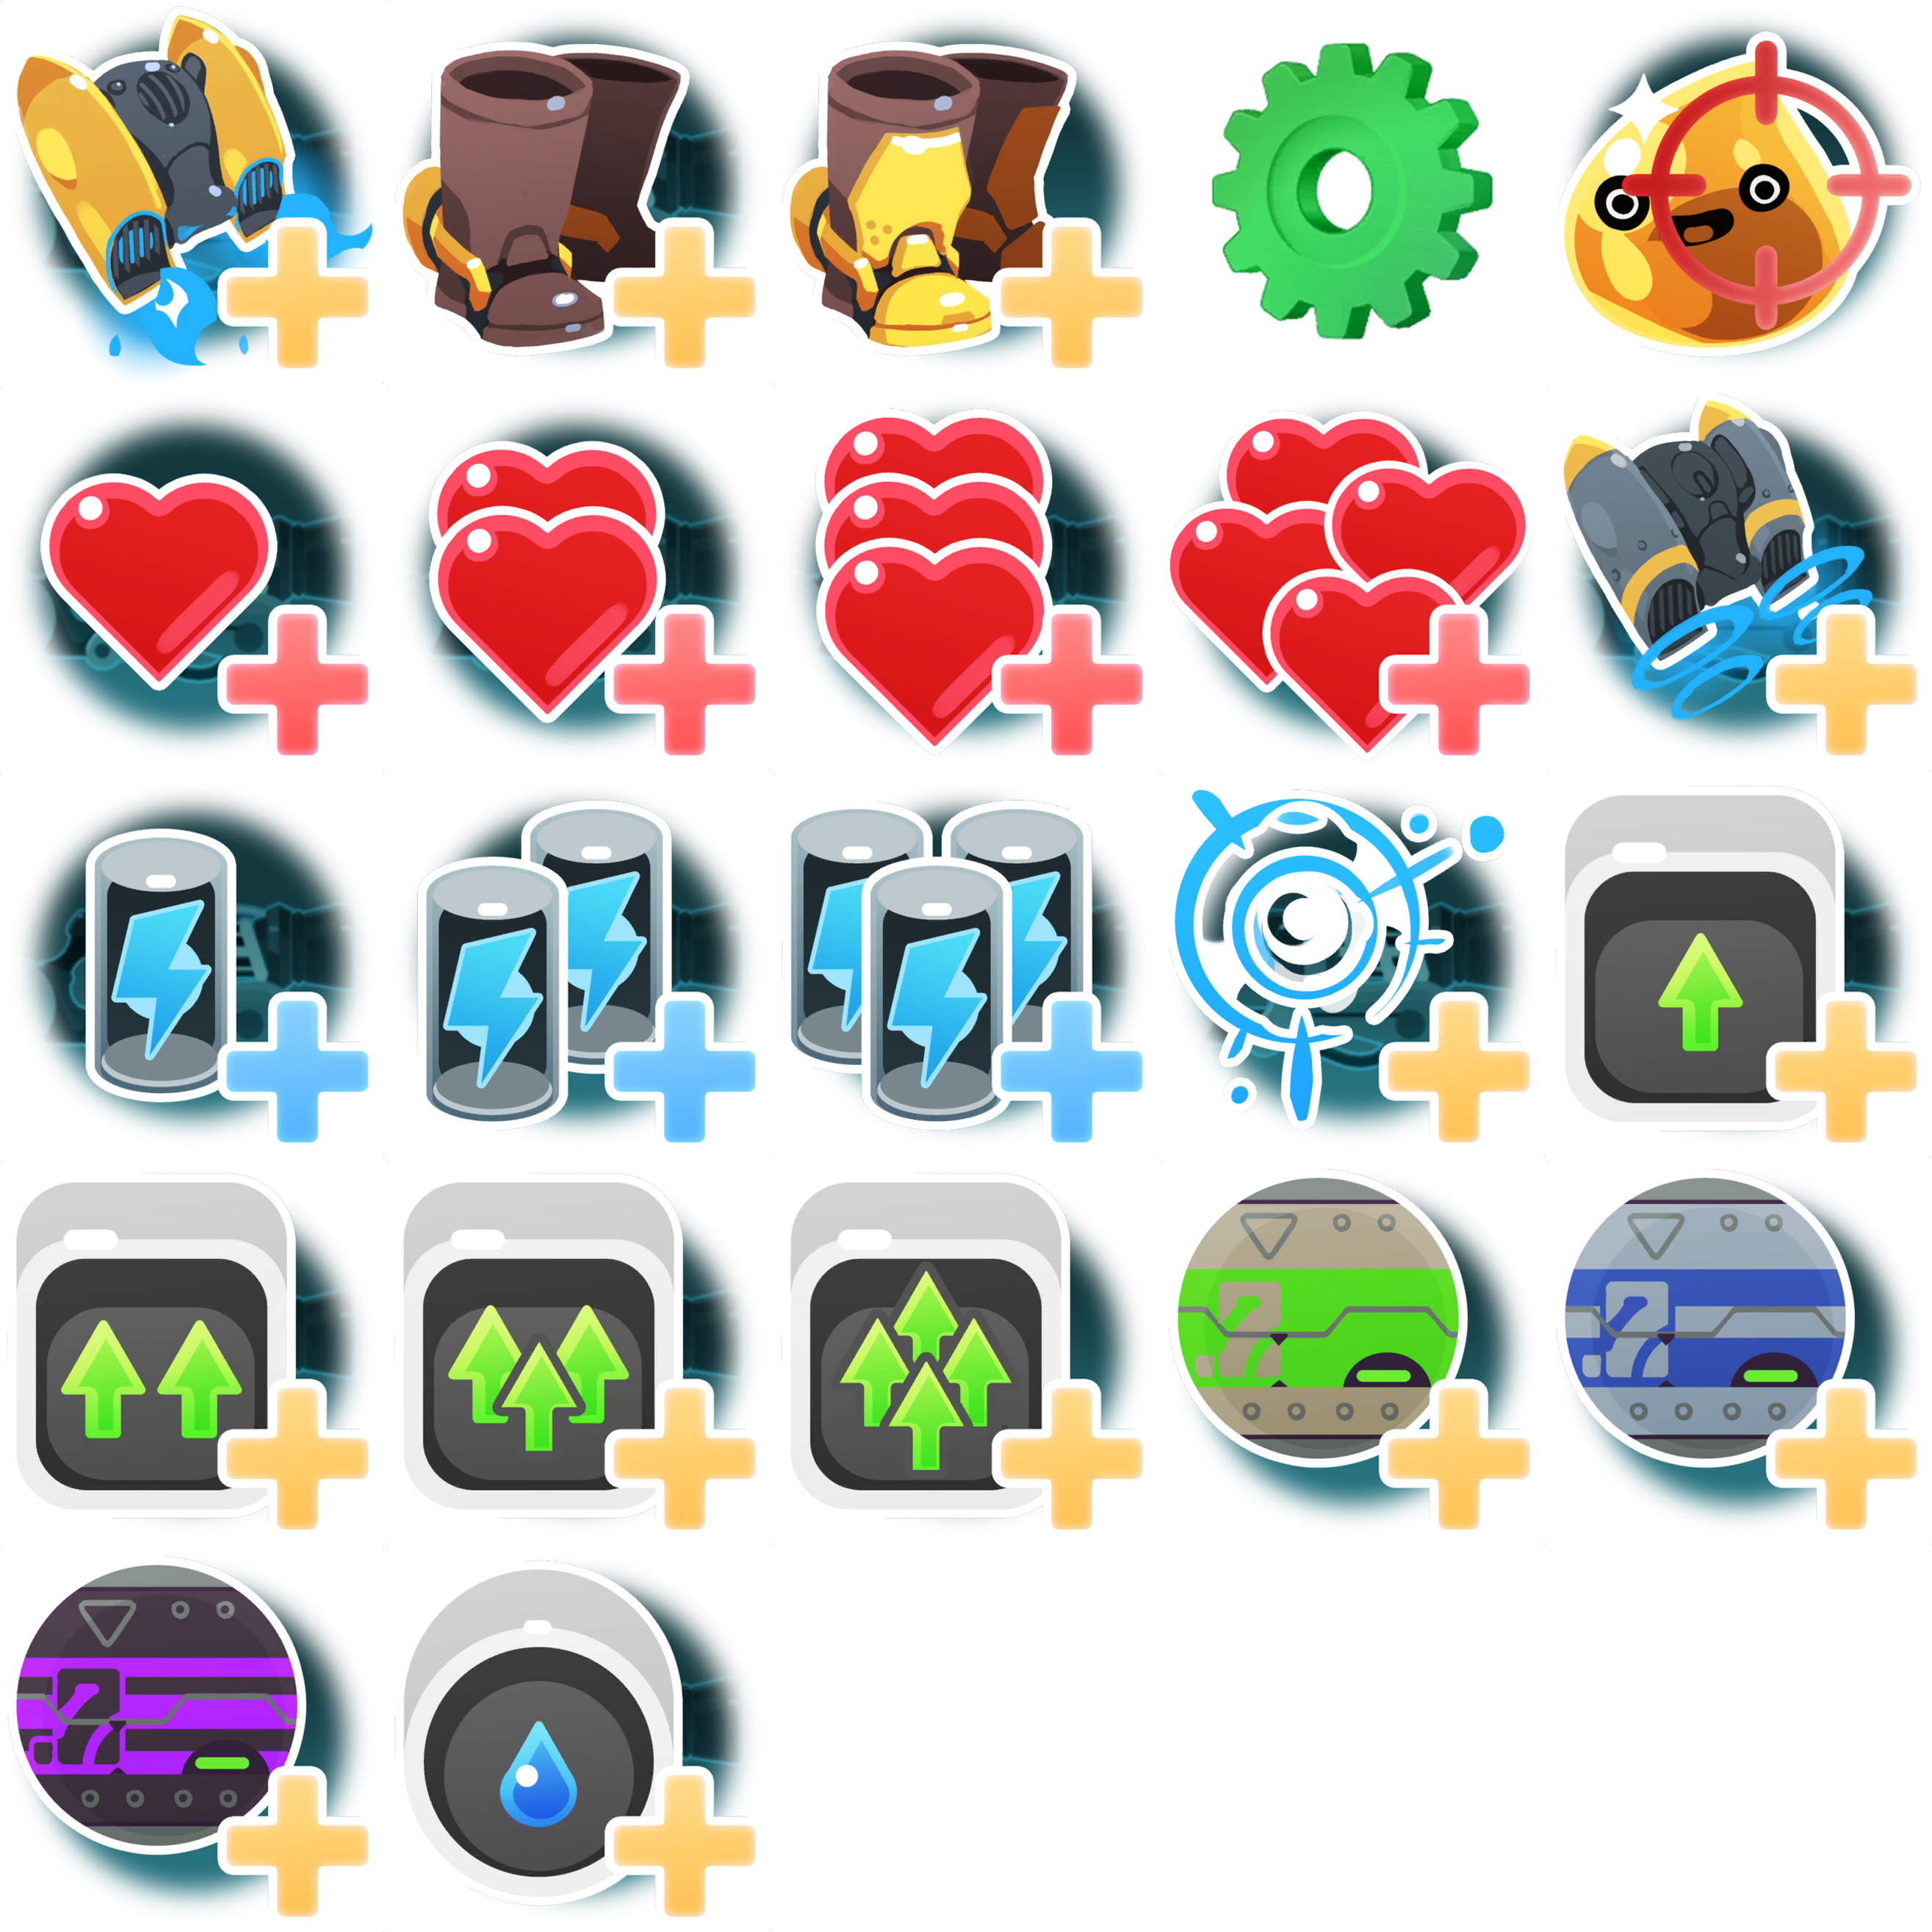 Slime Rancher - Shop Icons